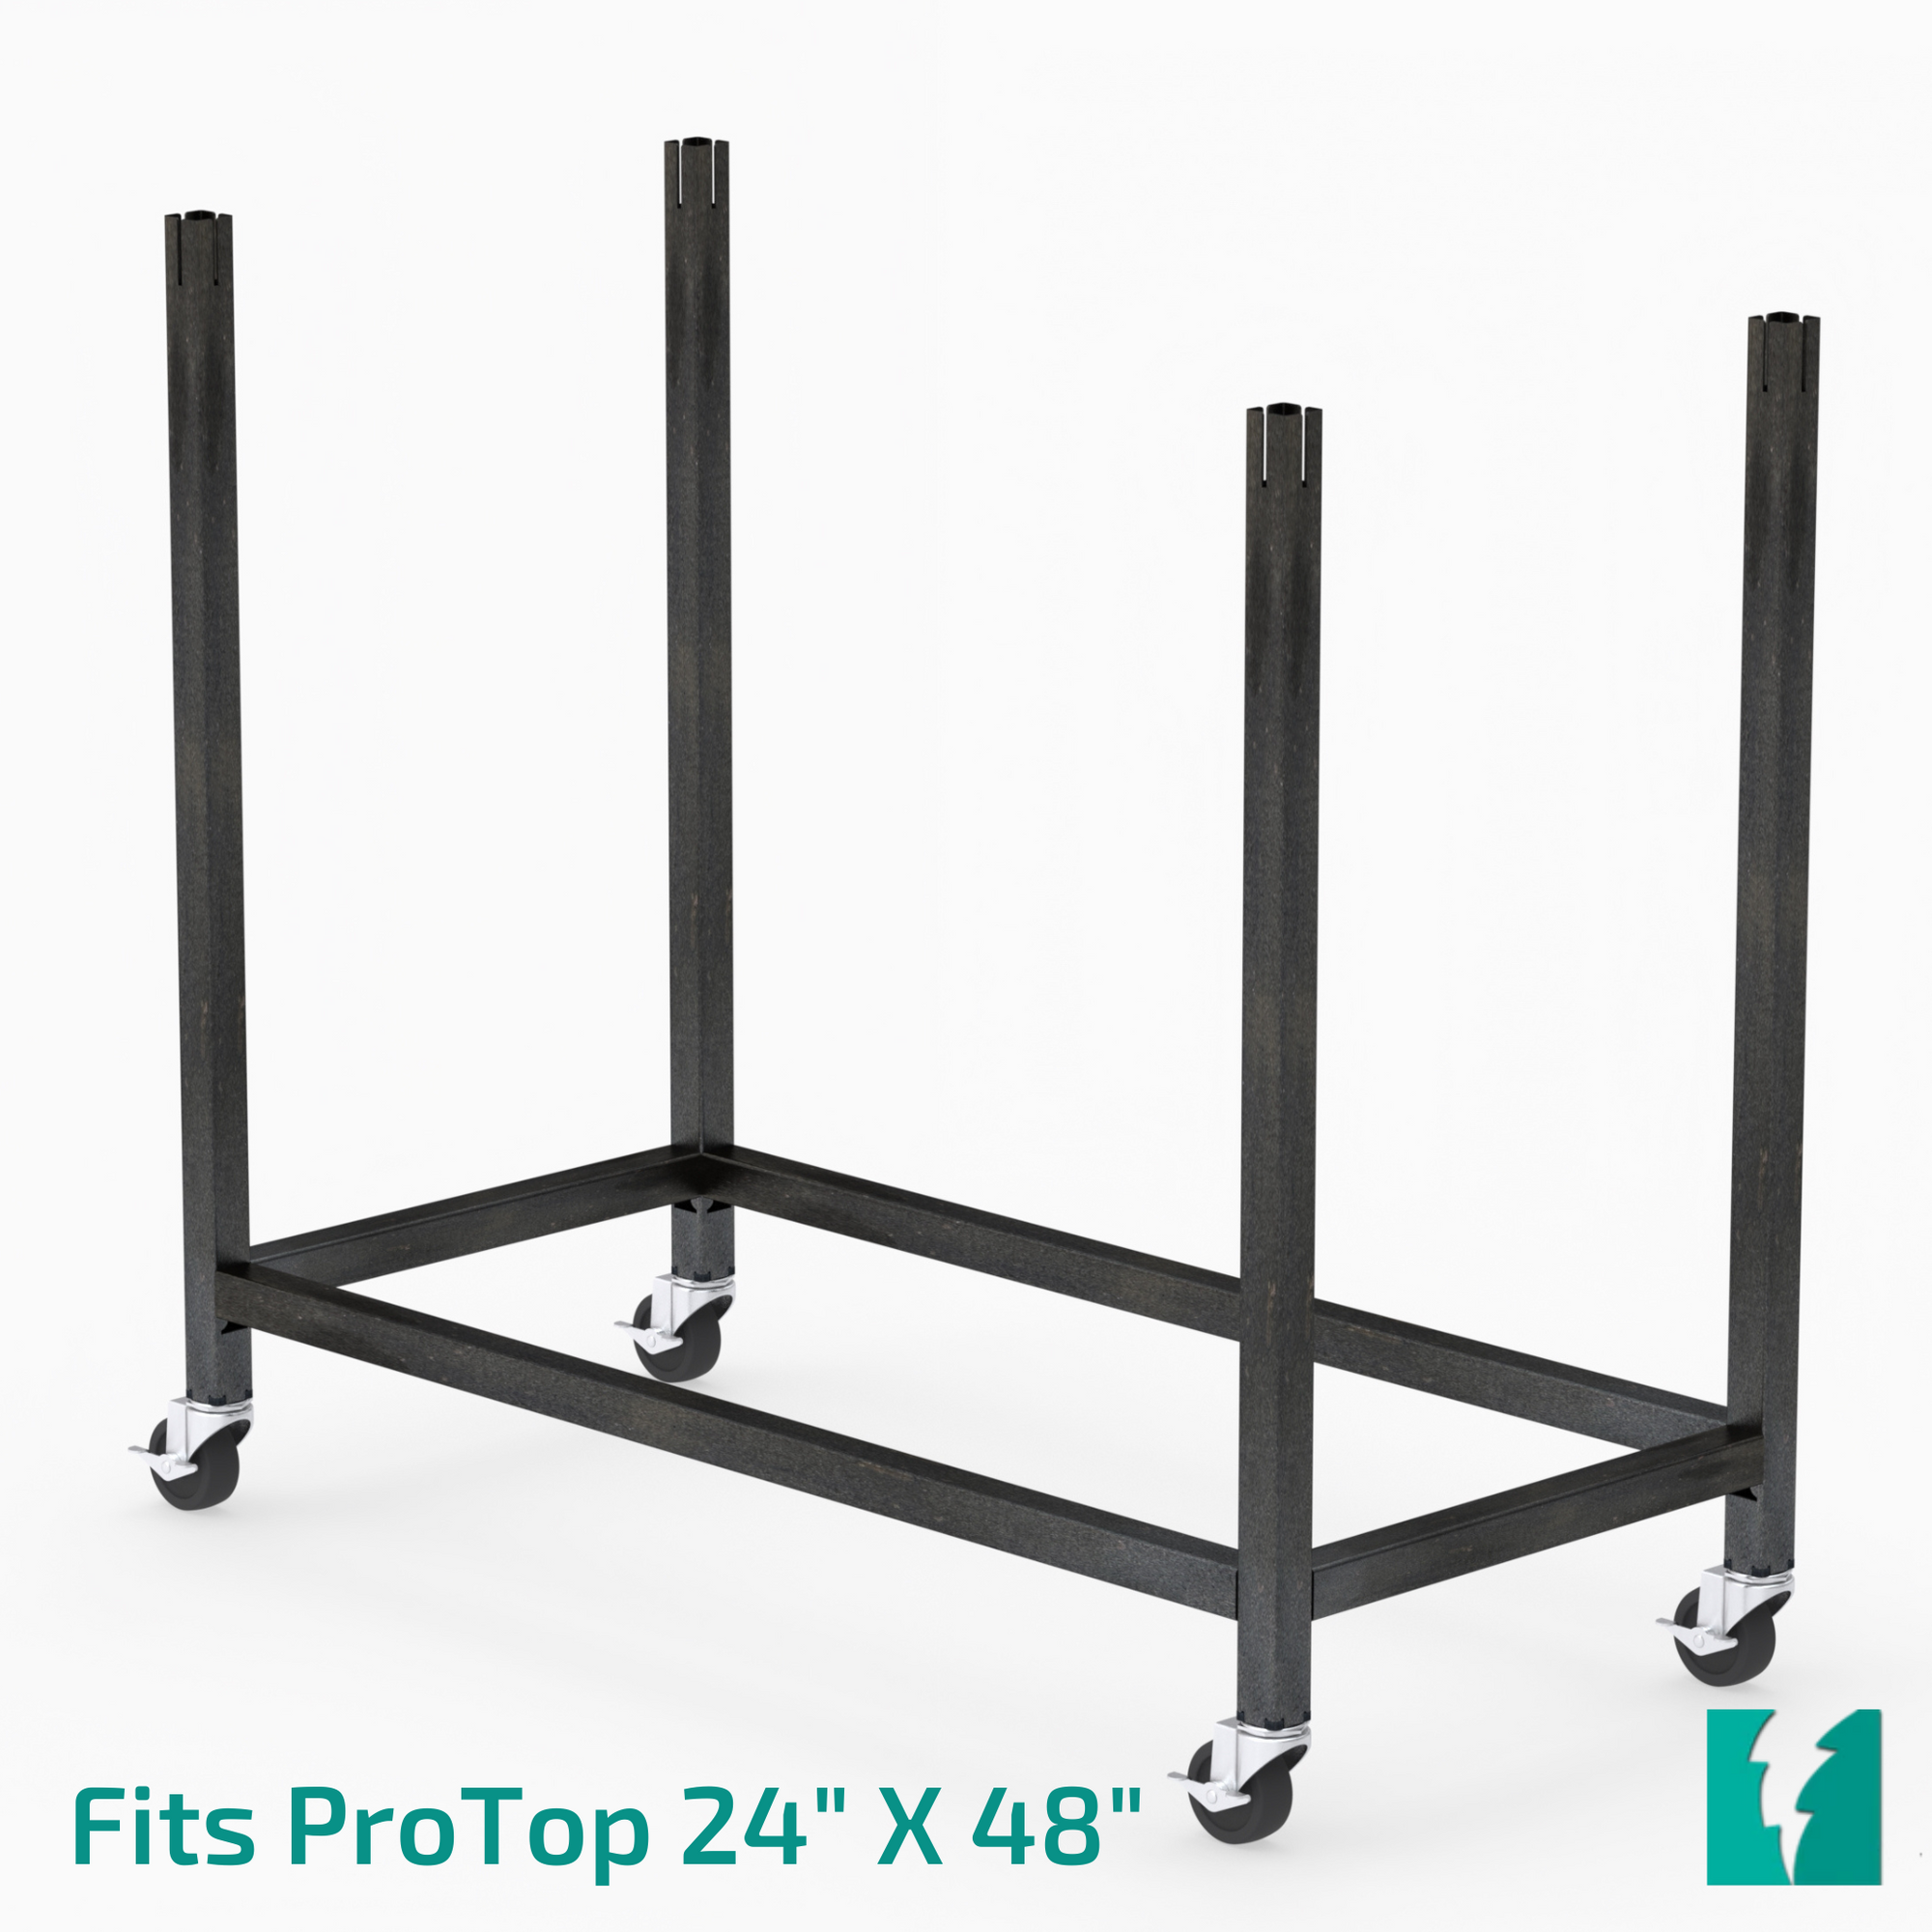 CertiFlat ProTop Leg Kit 24" X 48", LK2448 with Casters by Tab & Slot, CNC Tube Laser, CNC Tube Laser Leg Kit, LK2448